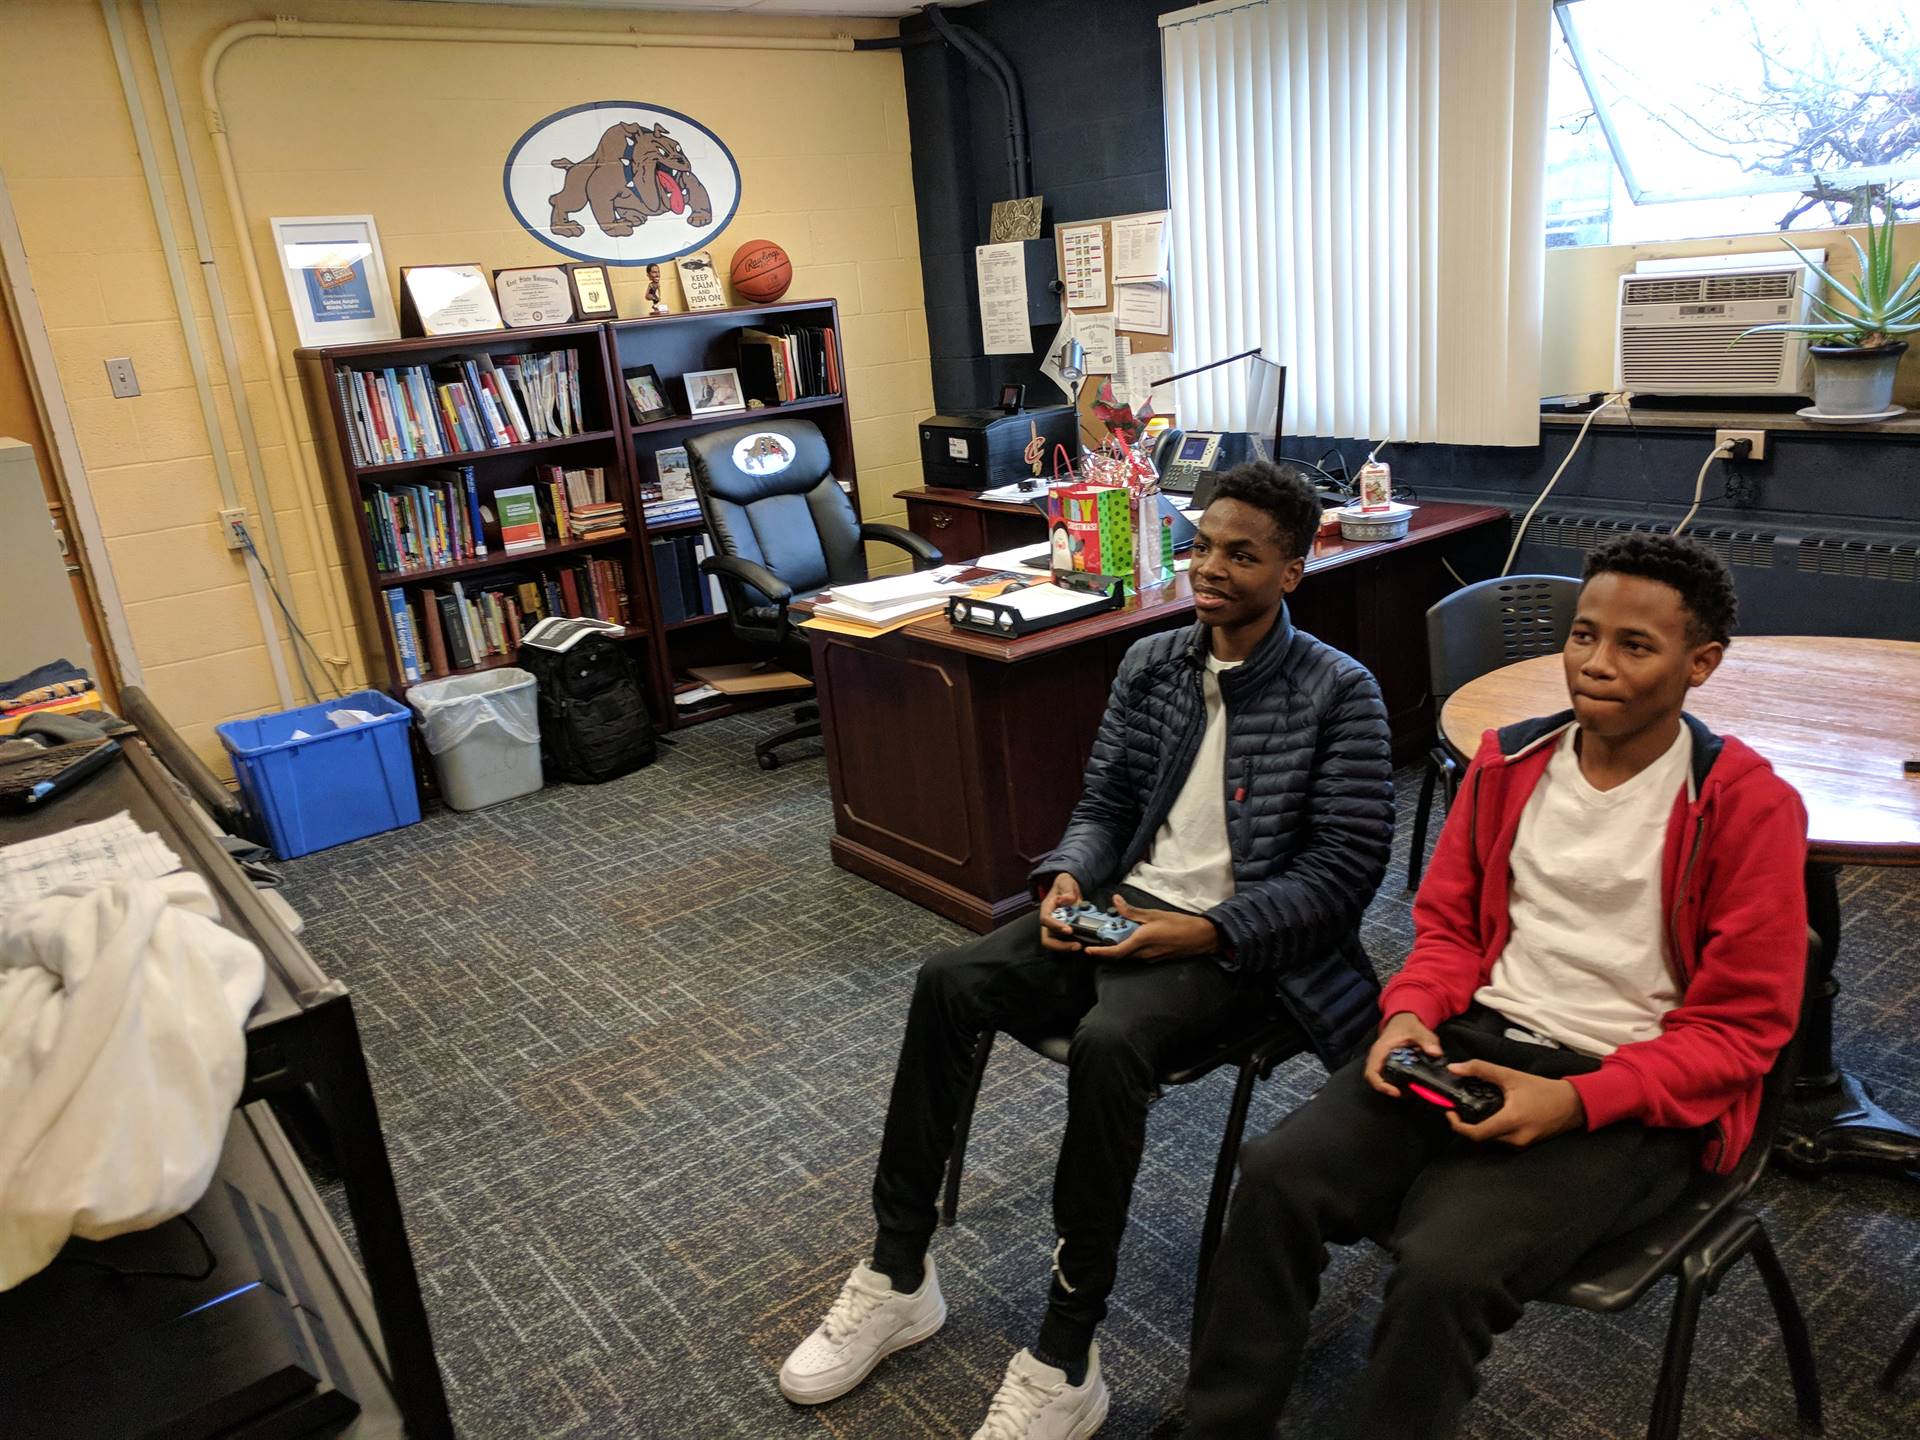 These 8th grade boys won an opportunity to play PS4 through a PTA Raffle.